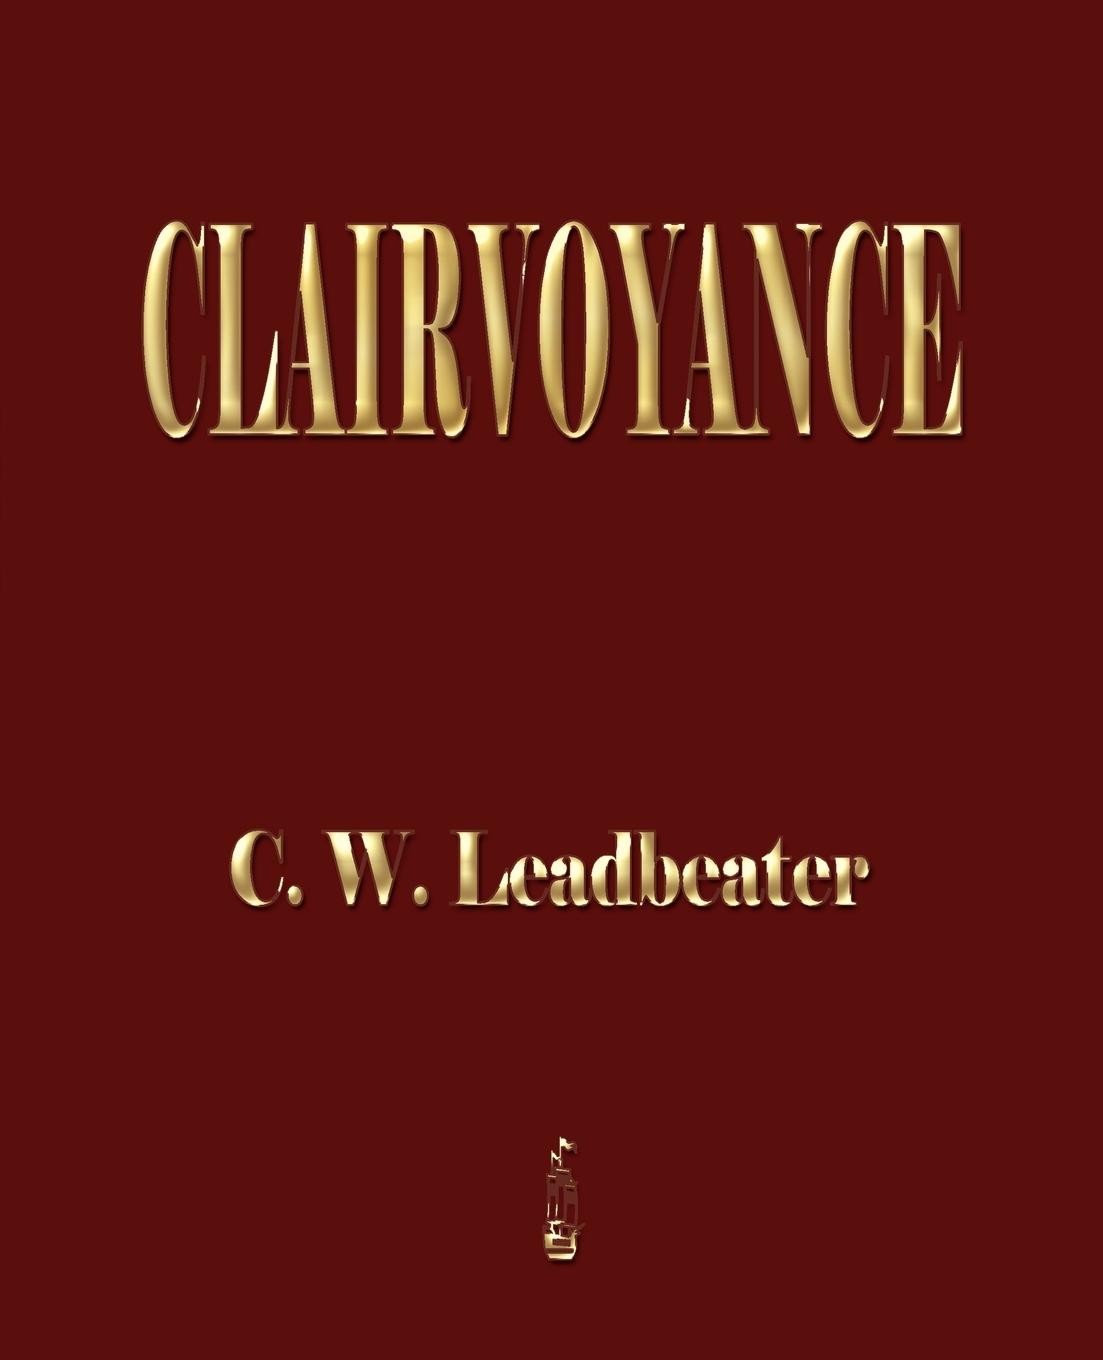 Clairvoyance - Leadbeater, Charles Webster